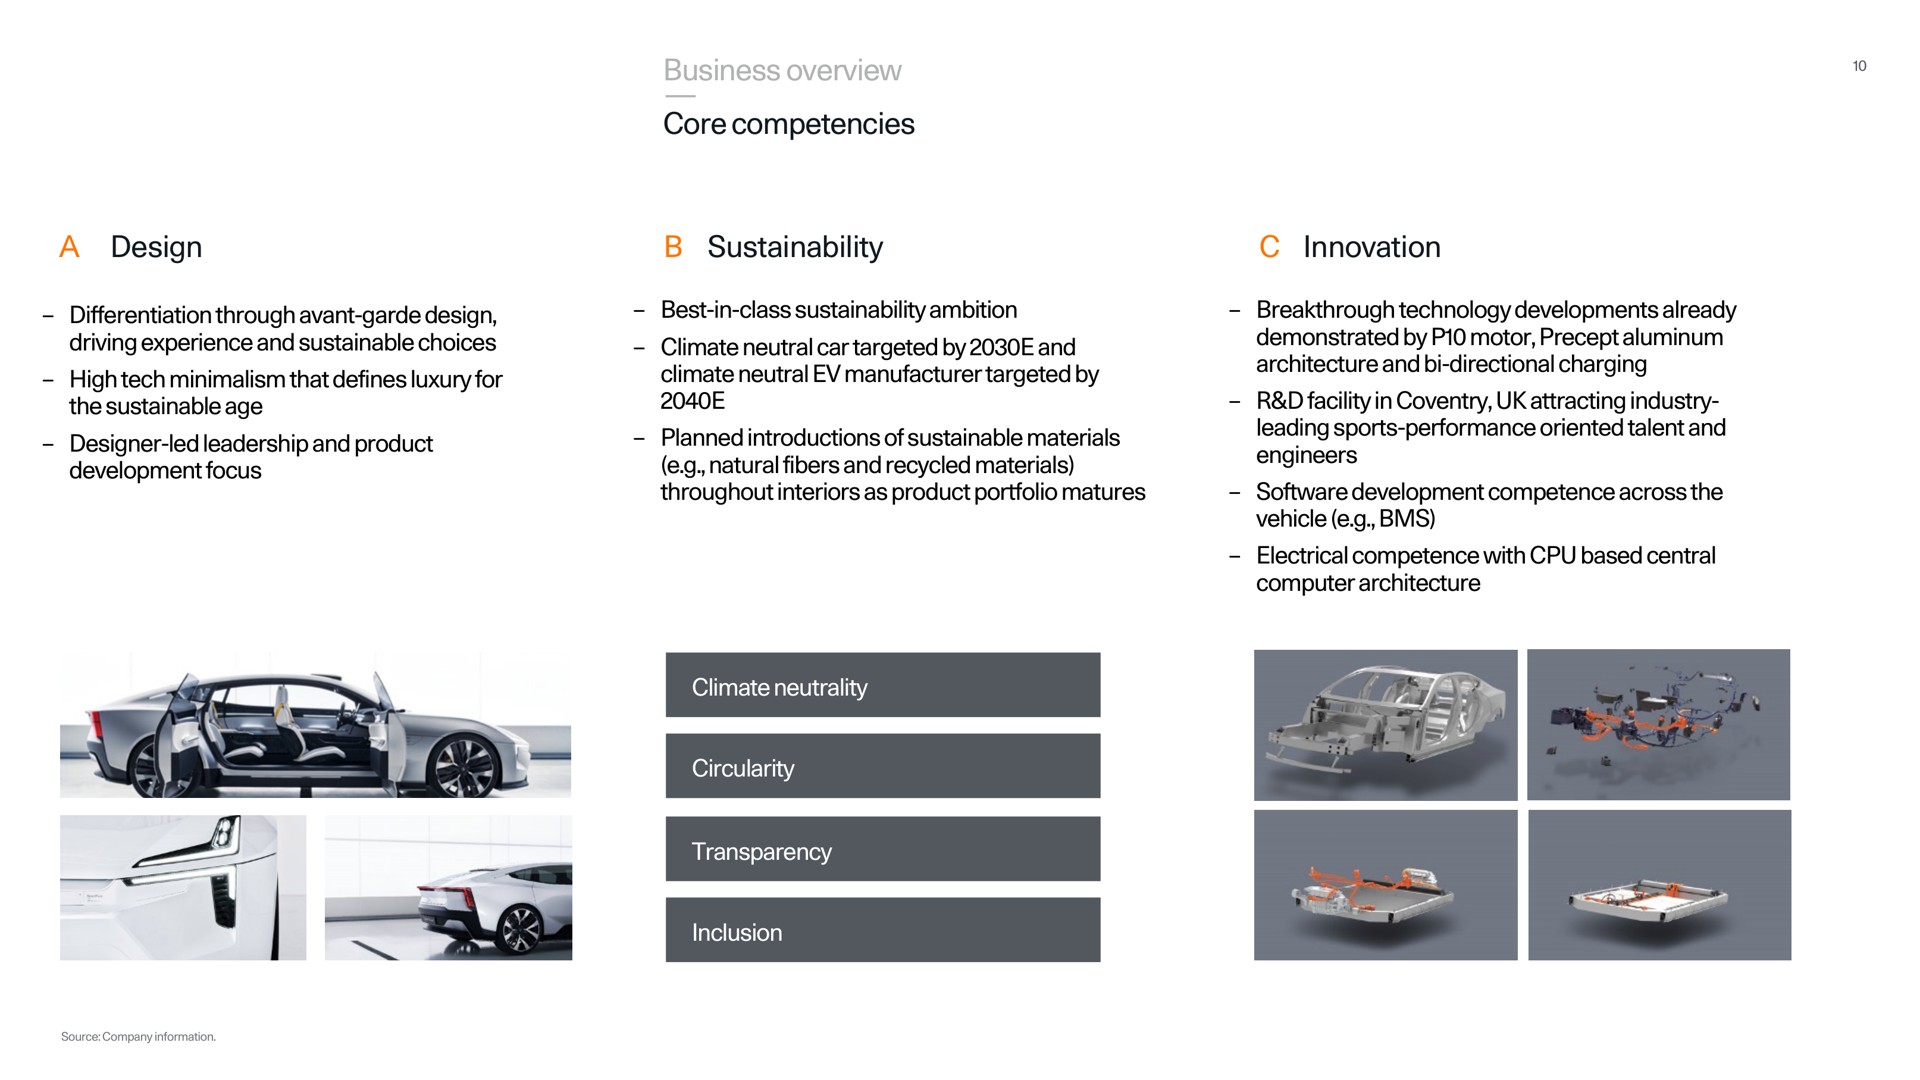 business overview core competencies a design innovation | Polestar